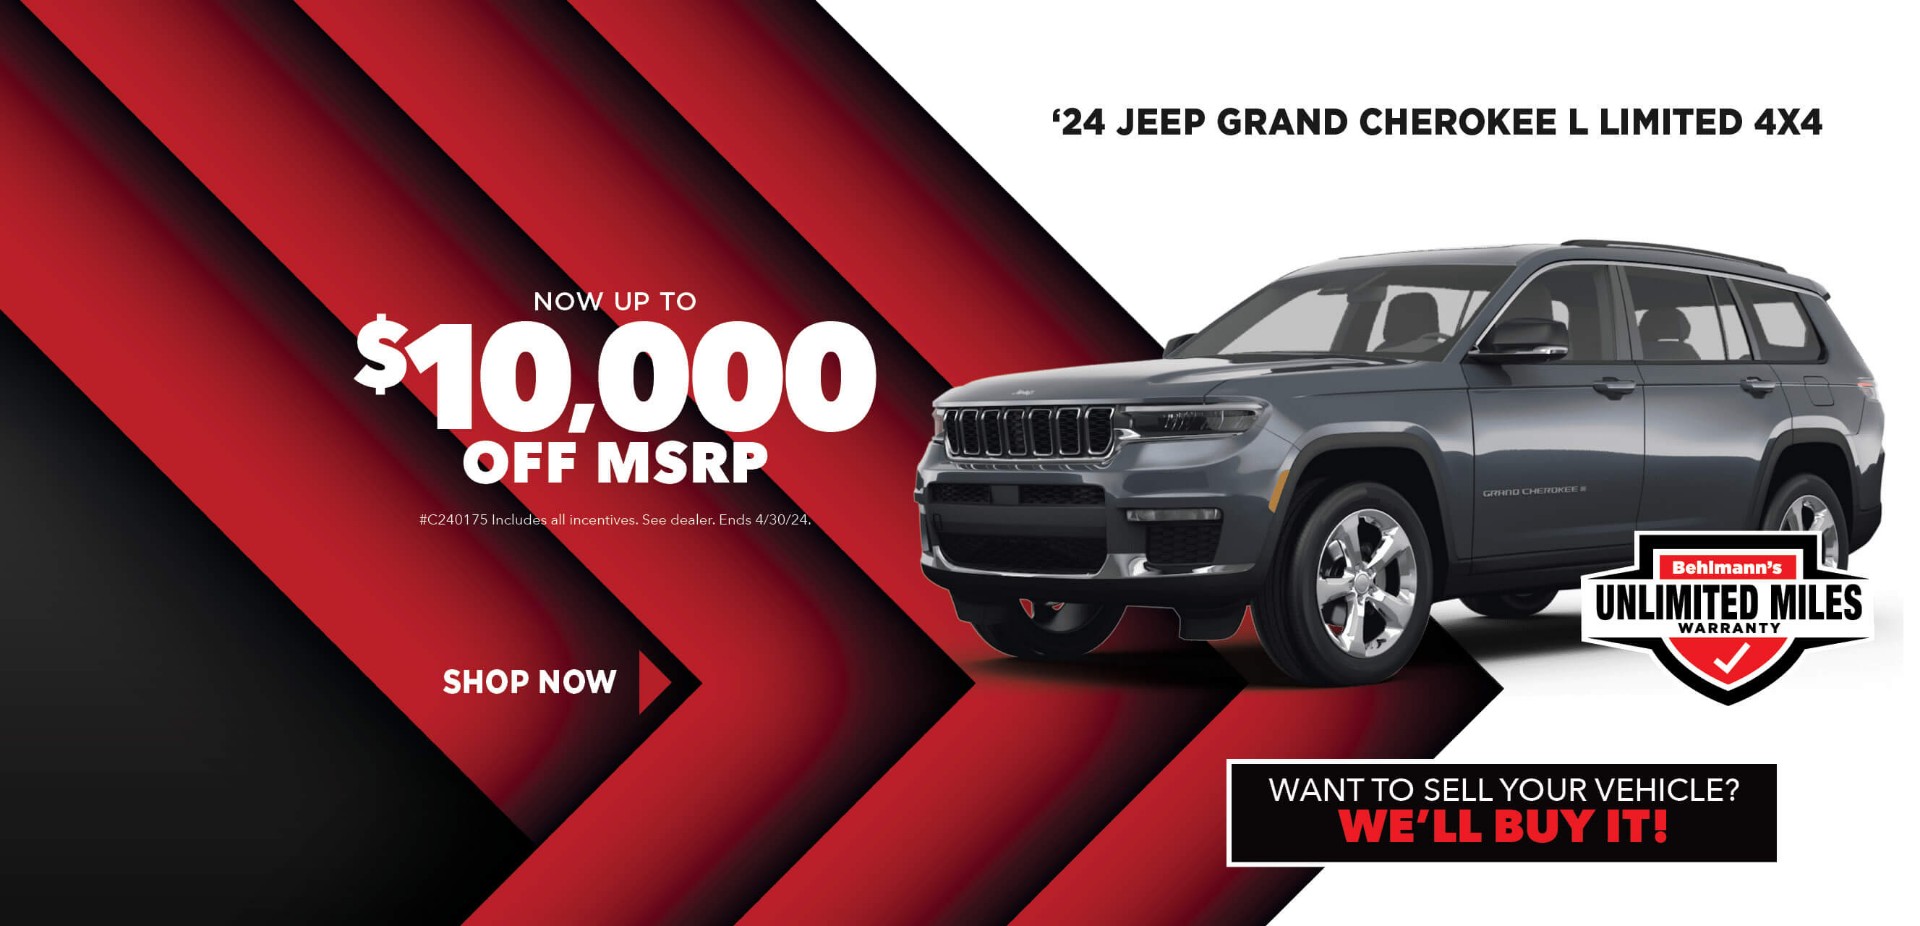 Gray SUV on red background with advertising slogans: April Savings - Now up to $10,000 off MSRP on 2024 Jeep Grand Cherokee Limited L.